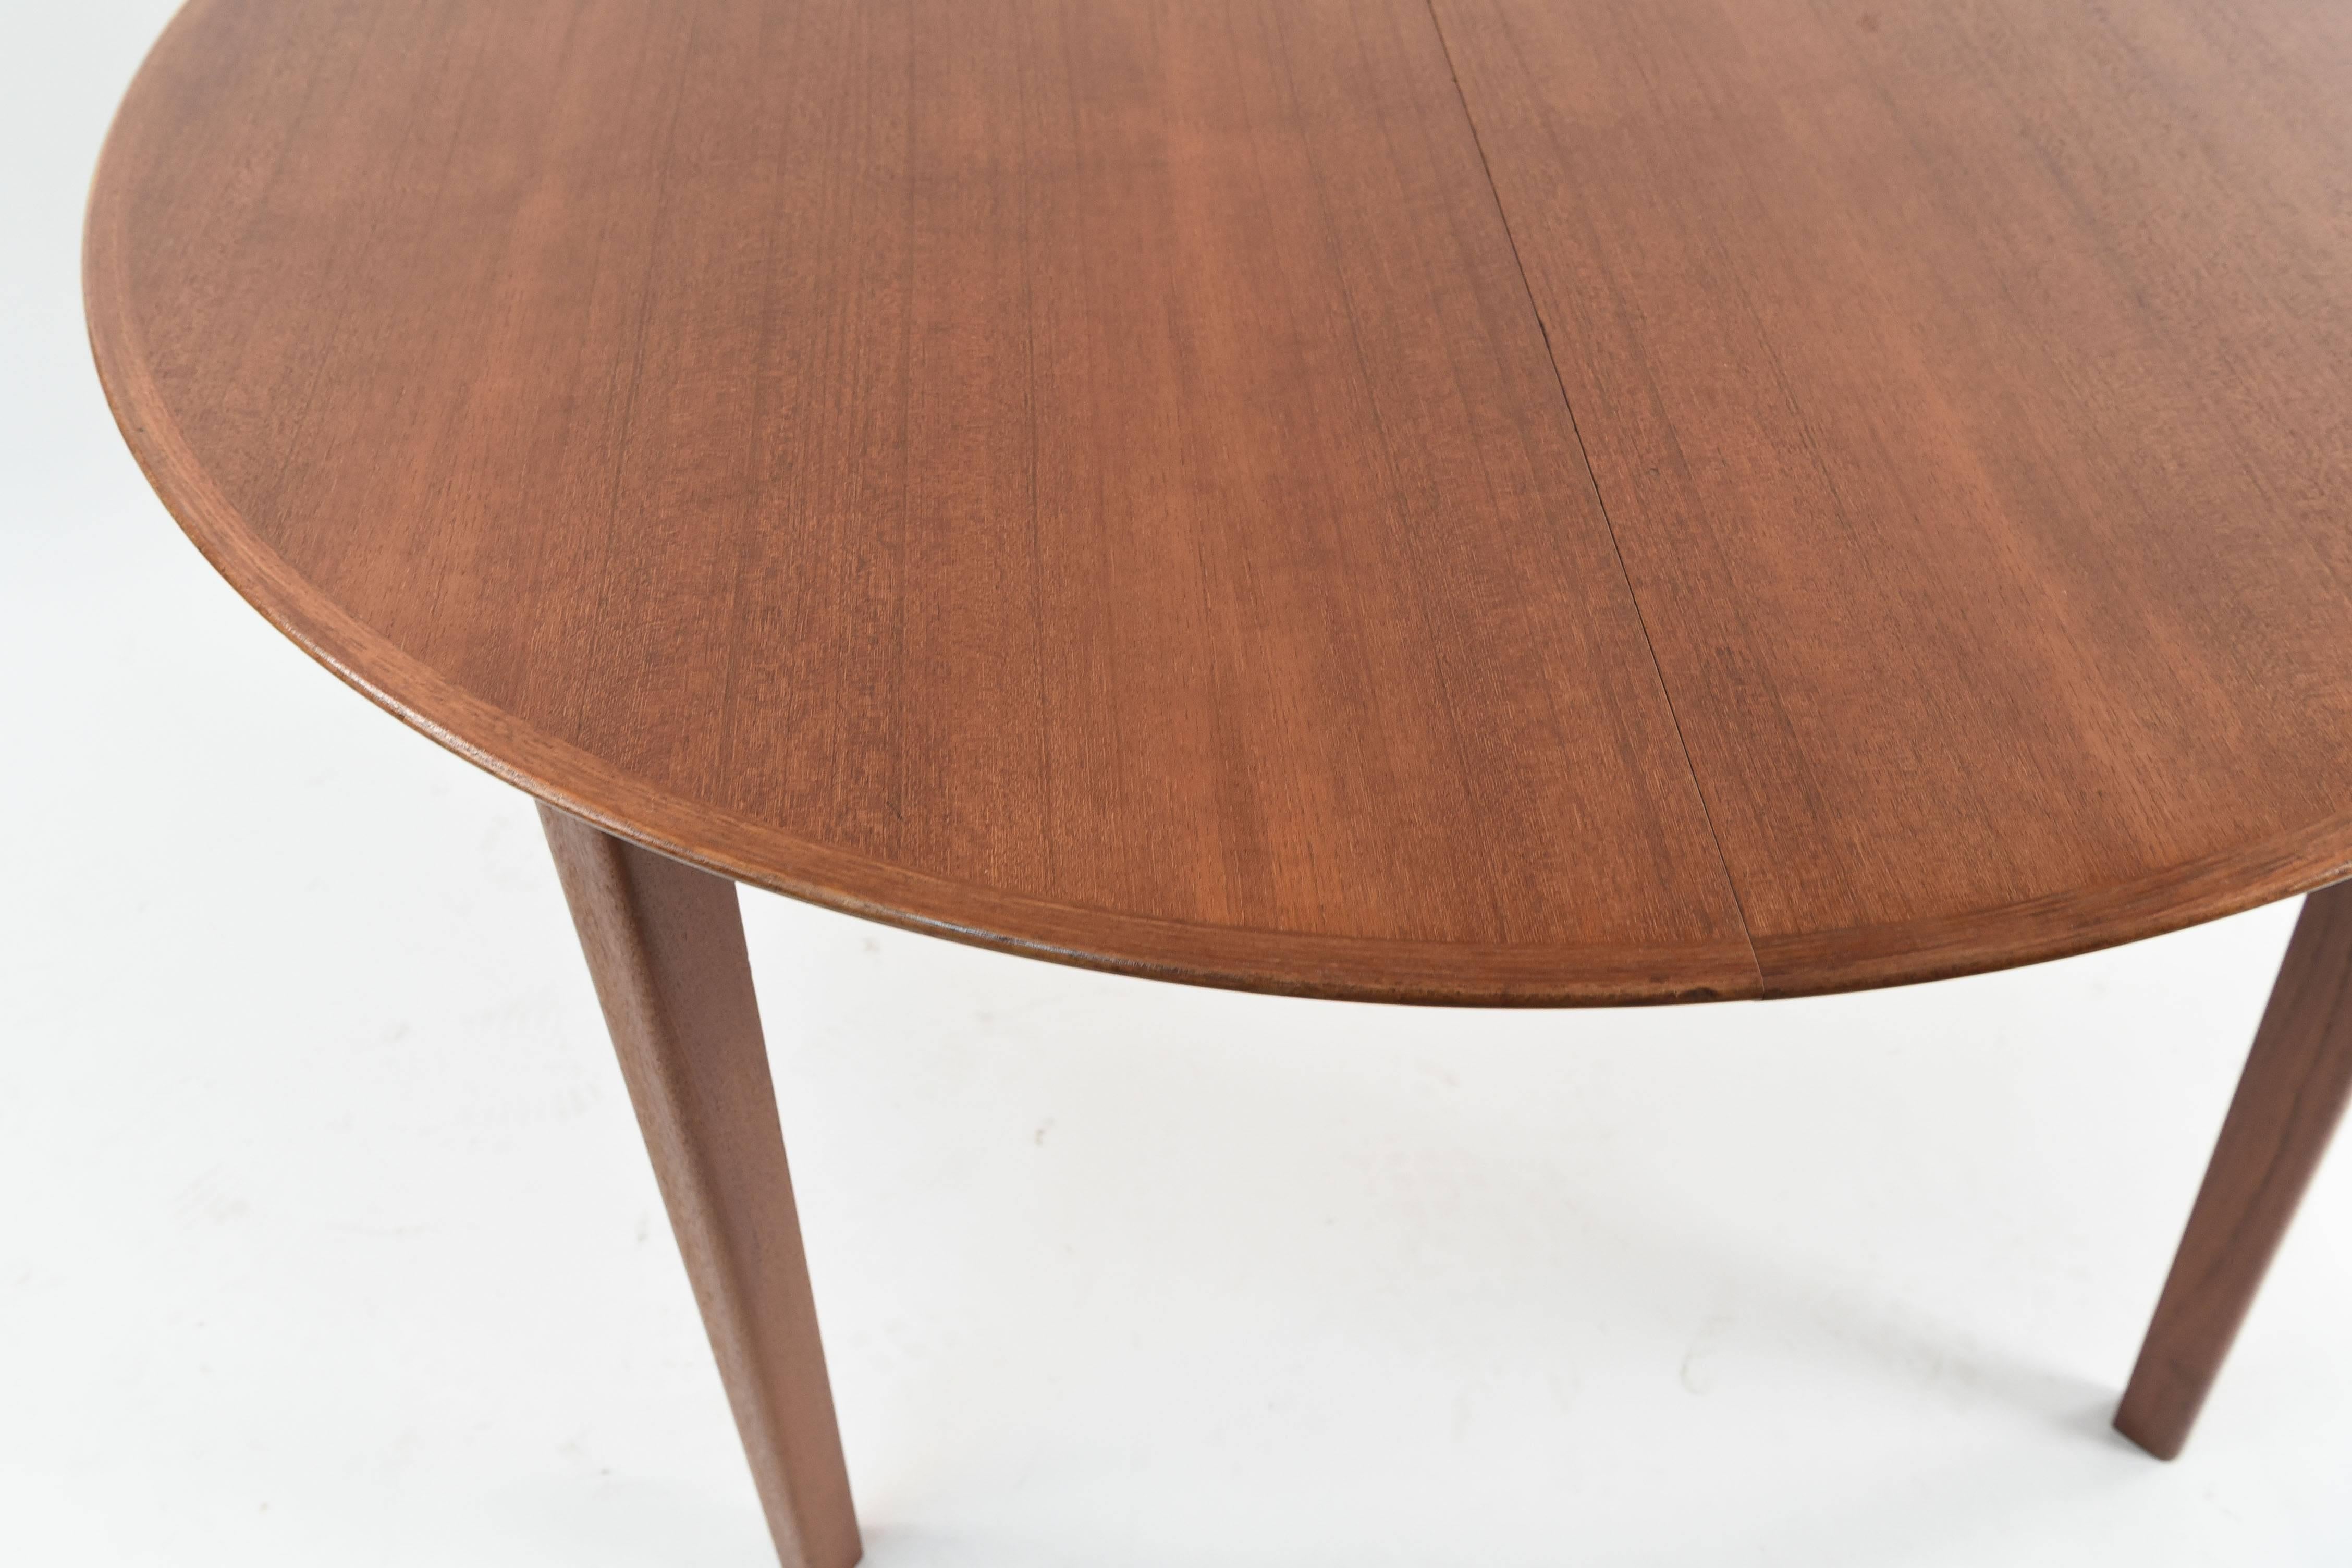 All restored very beautiful round dining table with beveled edges greatly designed by Ole Hald for Gudme Møbelfabrik. Superb quality and excellent condition.

Measures 48 inches in diameter with one extension that can make the table a total of 86